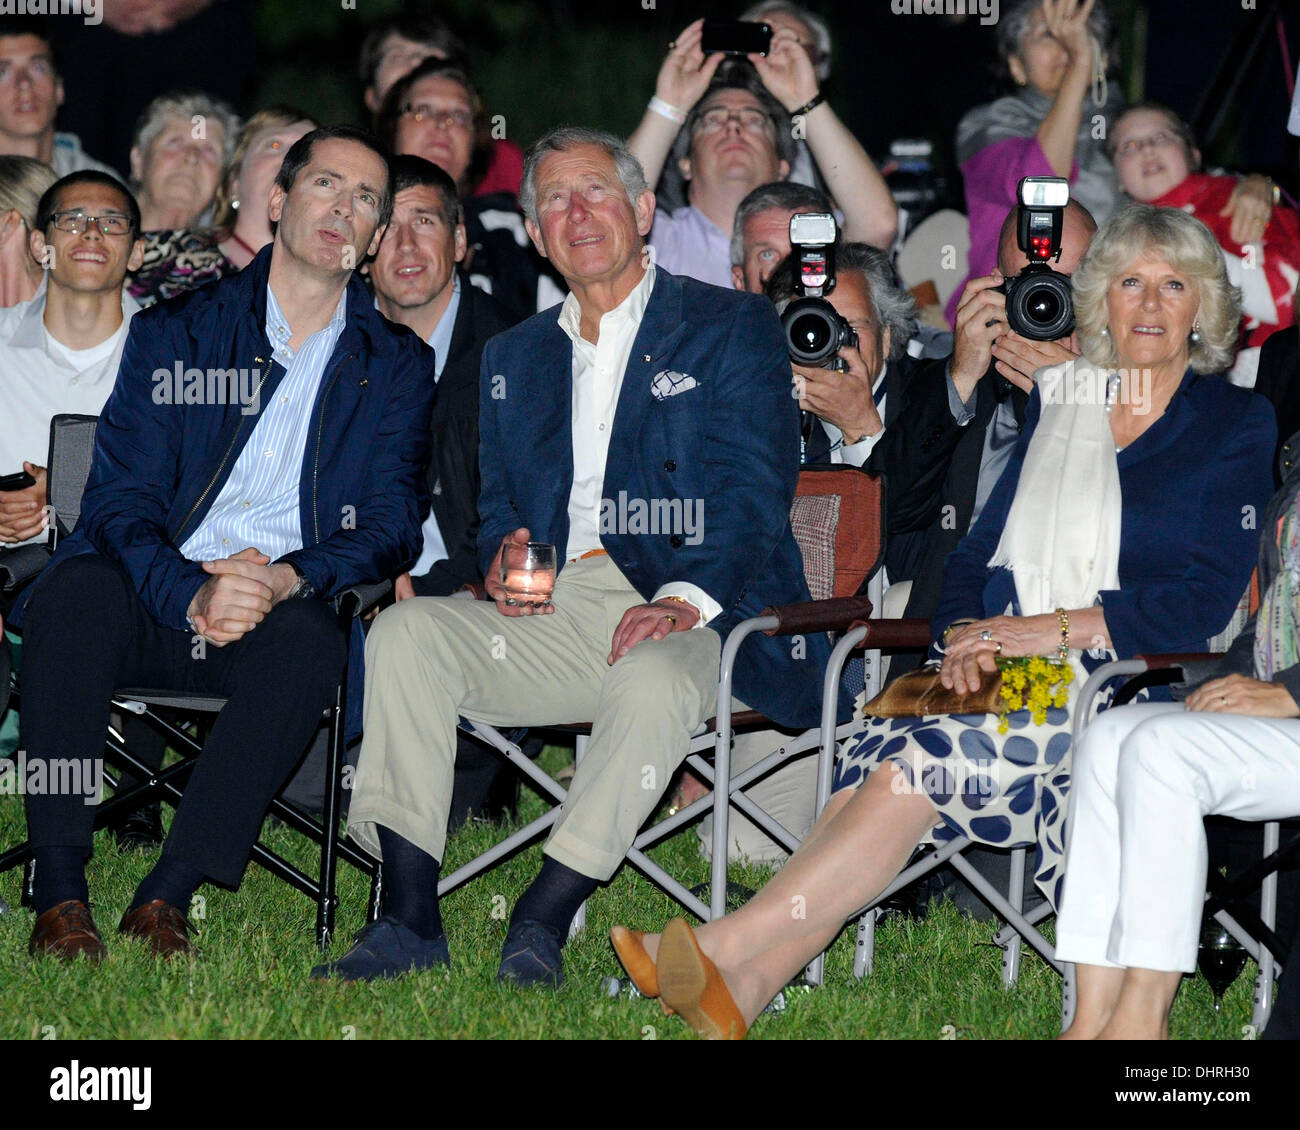 Dalton McGuinty, Premier of Ontario, Prince Charles, The Prince of Wales and Camilla, The Duchess of Cornwall   attend the Victoria Day Firework display at Ashbridges Bay hosted by the Government of Ontario during the 2012 Royal Tour of Ontario, celebrating Her Majesty's Diamond Jubilee.   Toronto, Canada - 21.05.12 Stock Photo